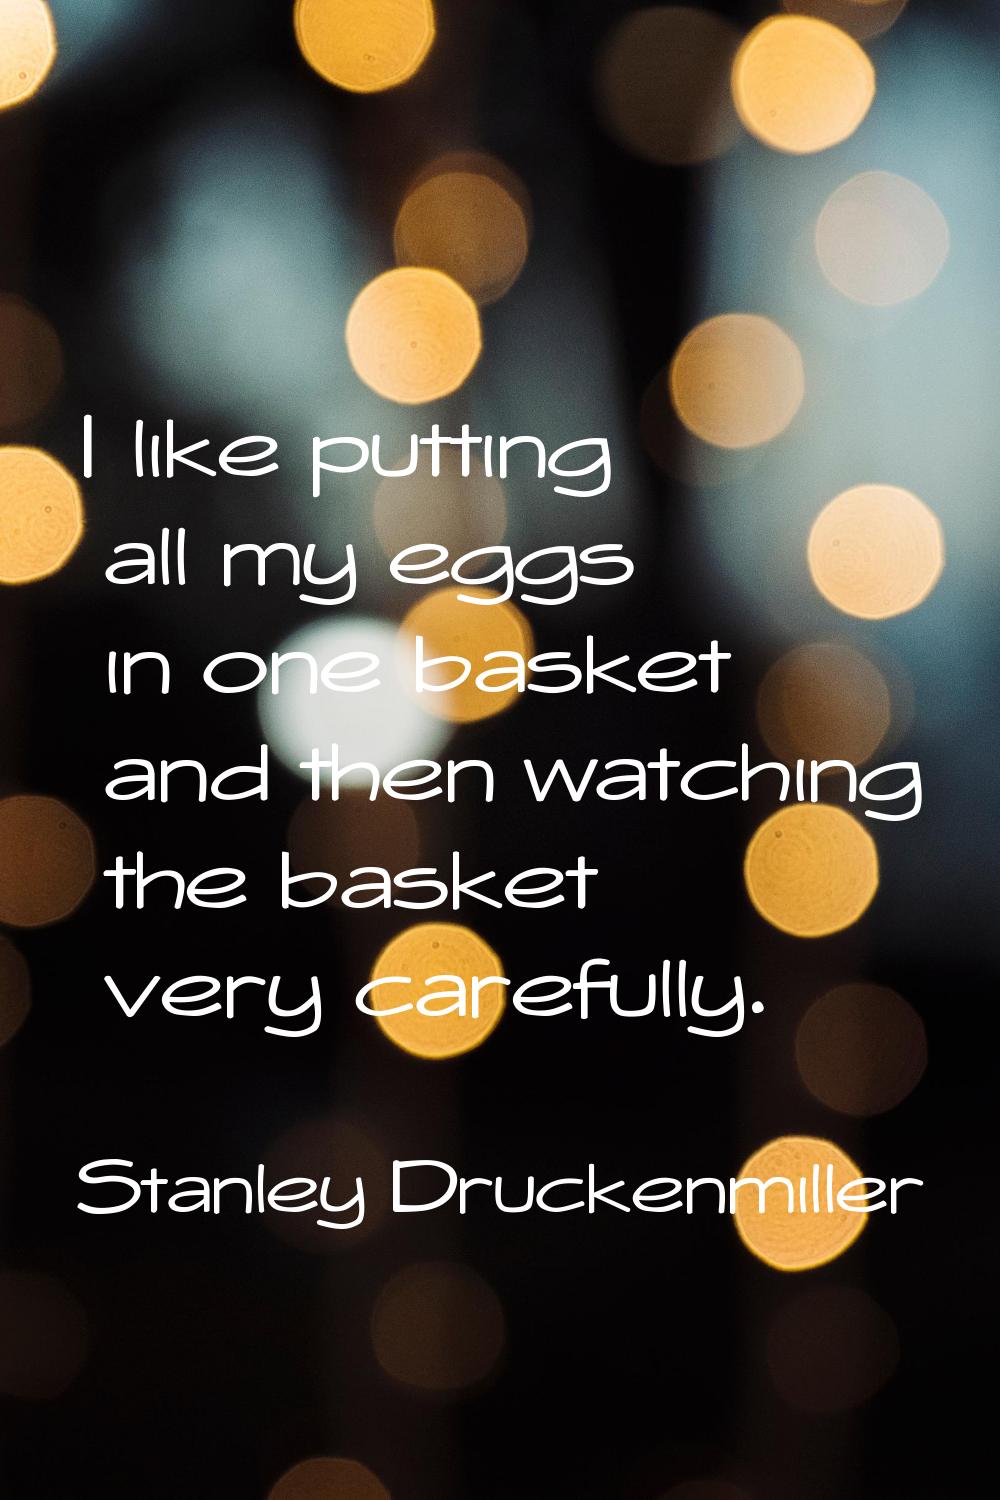 I like putting all my eggs in one basket and then watching the basket very carefully.